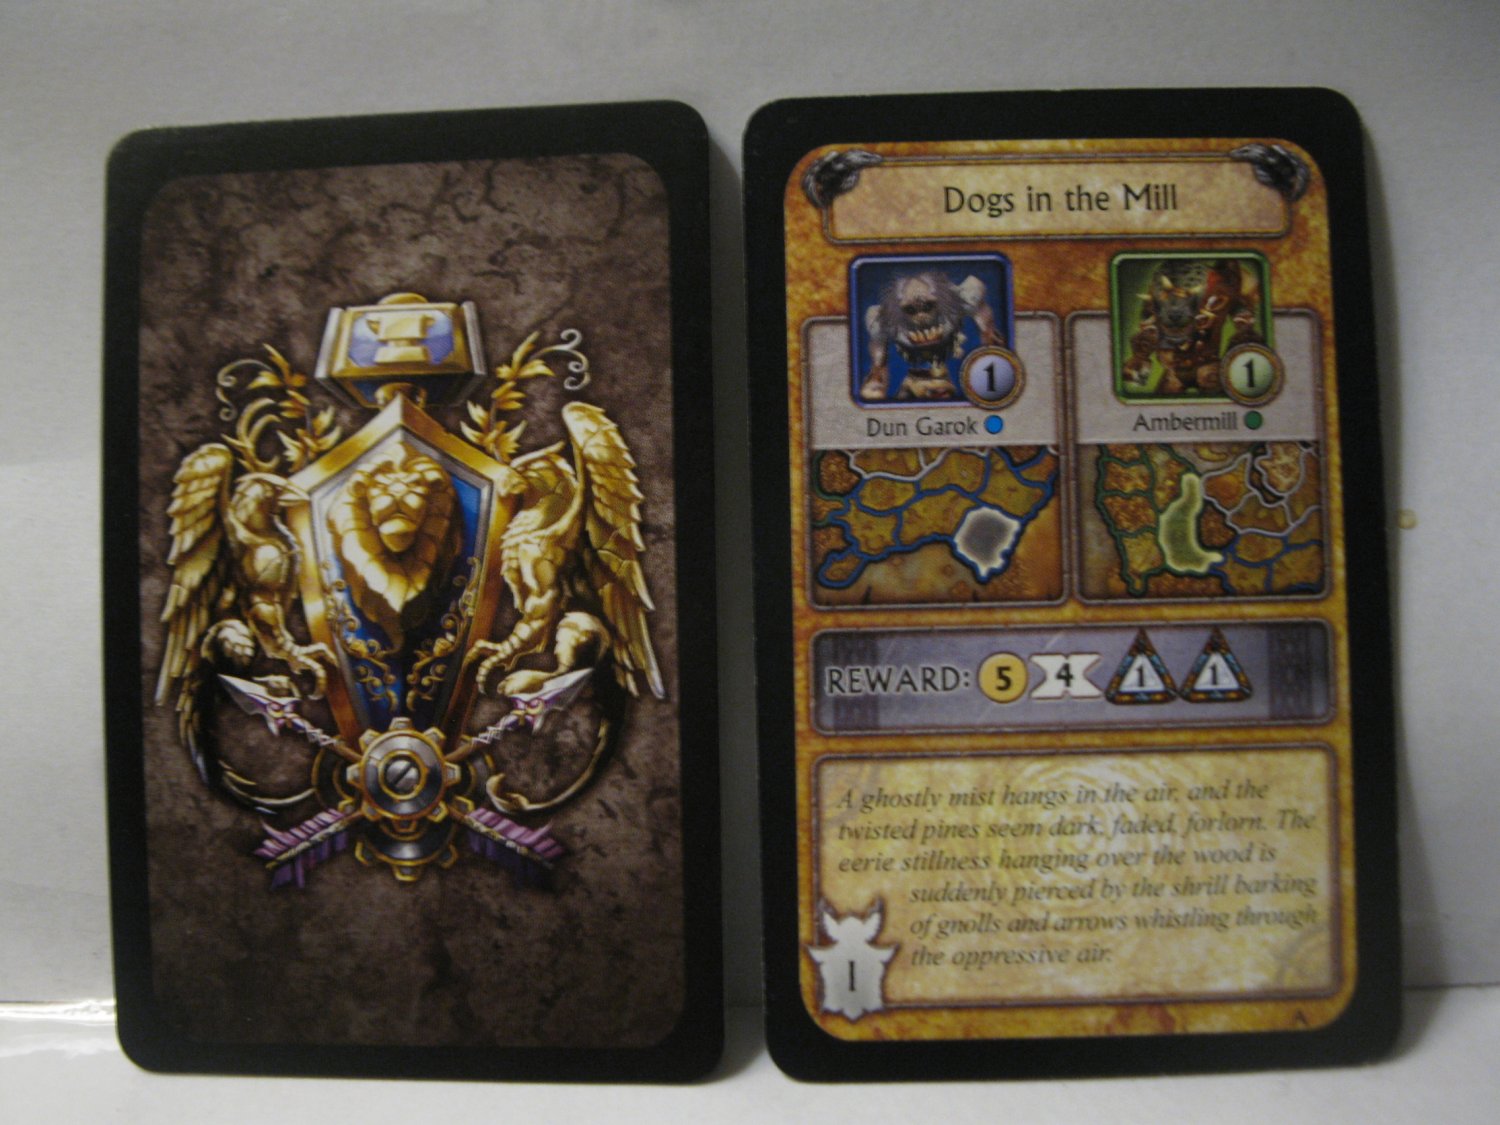 2005 World of Warcraft Board Game piece: Quest Card - Dogs in the Mill